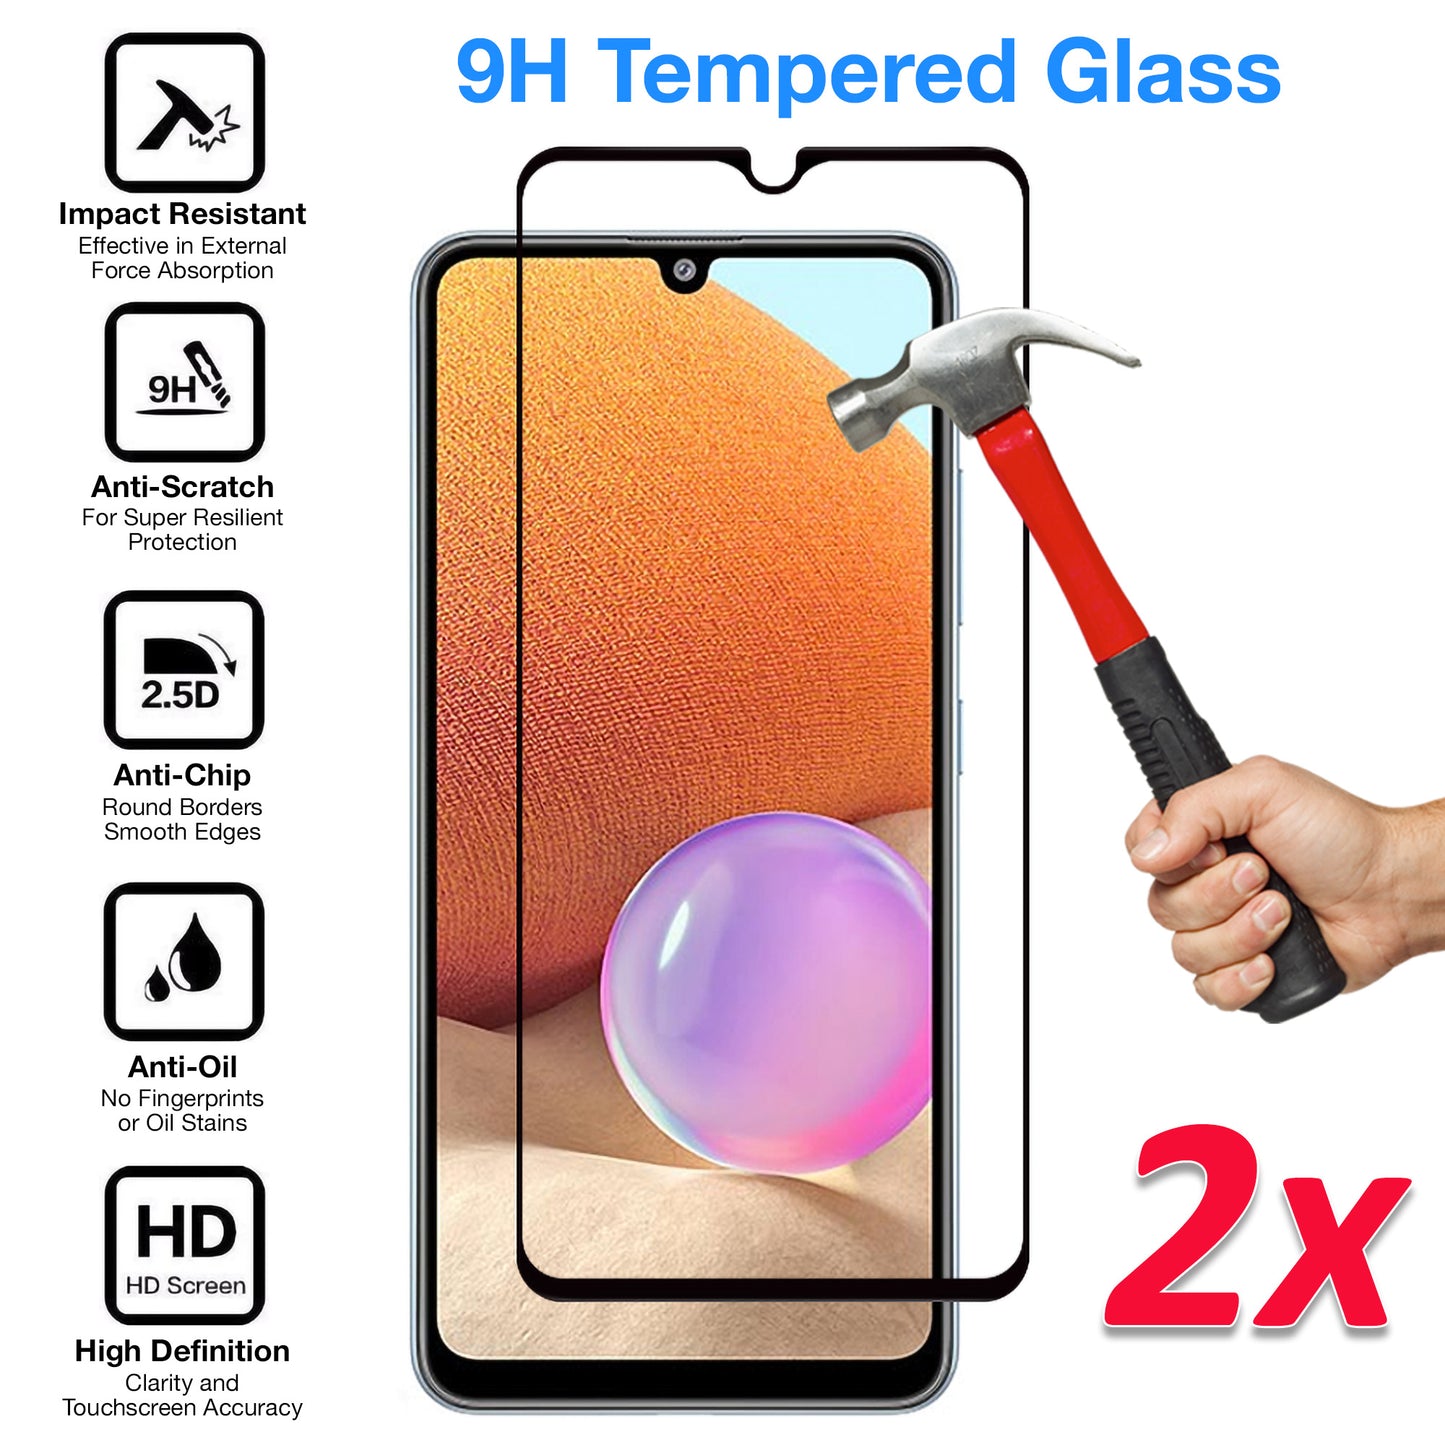 [2 Pack] MEZON Full Coverage Samsung Galaxy A32 4G Tempered Glass Crystal Clear Premium 9H HD Screen Protector (A32, 9H Full)